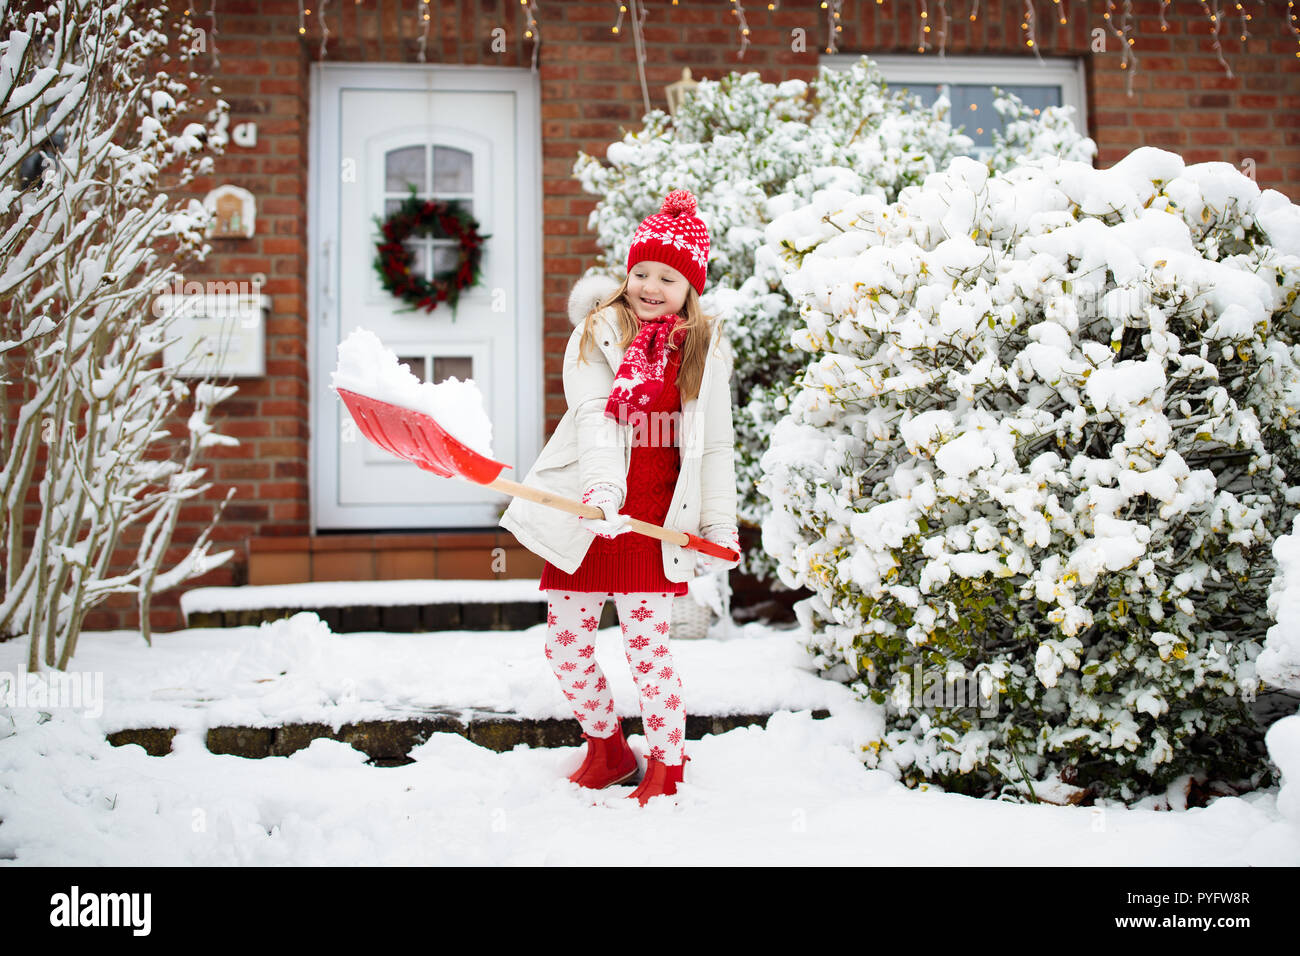 Child shoveling snow. Little girl with spade clearing driveway after winter snowstorm. Kids clear path to house door after Christmas blizzard. Snowfal Stock Photo